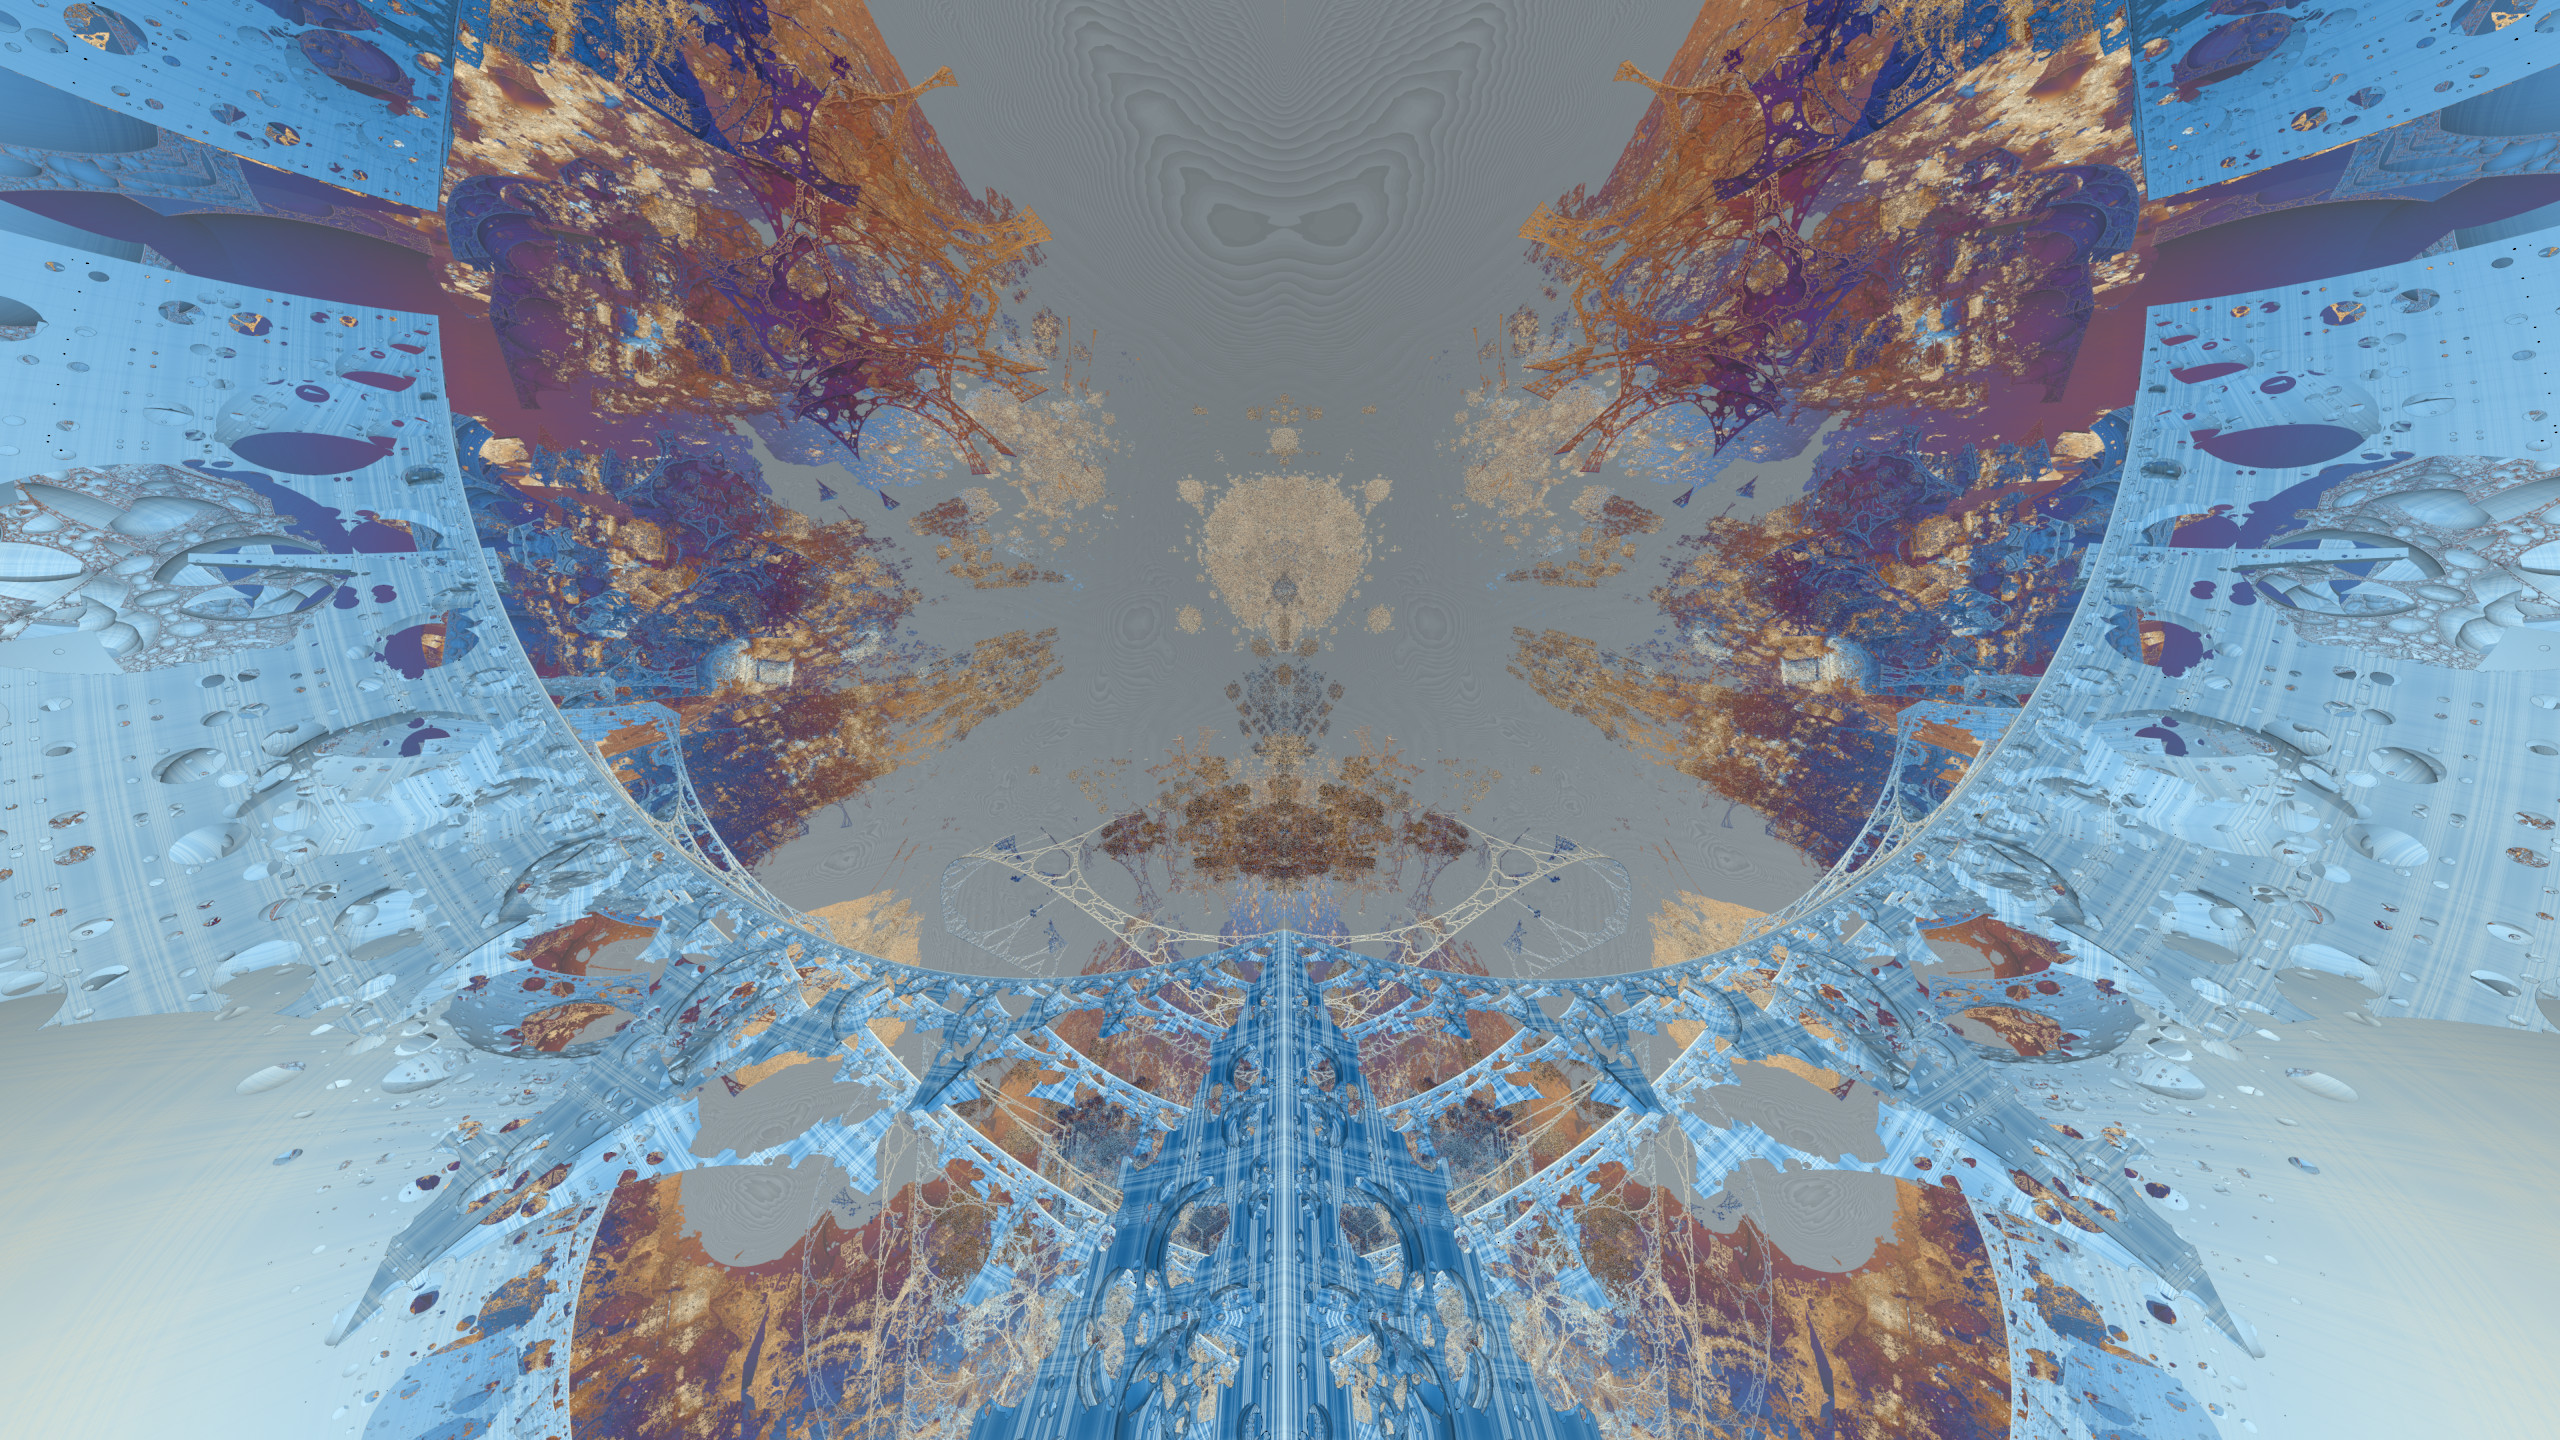 Negative scale Mandelbox: Looking out